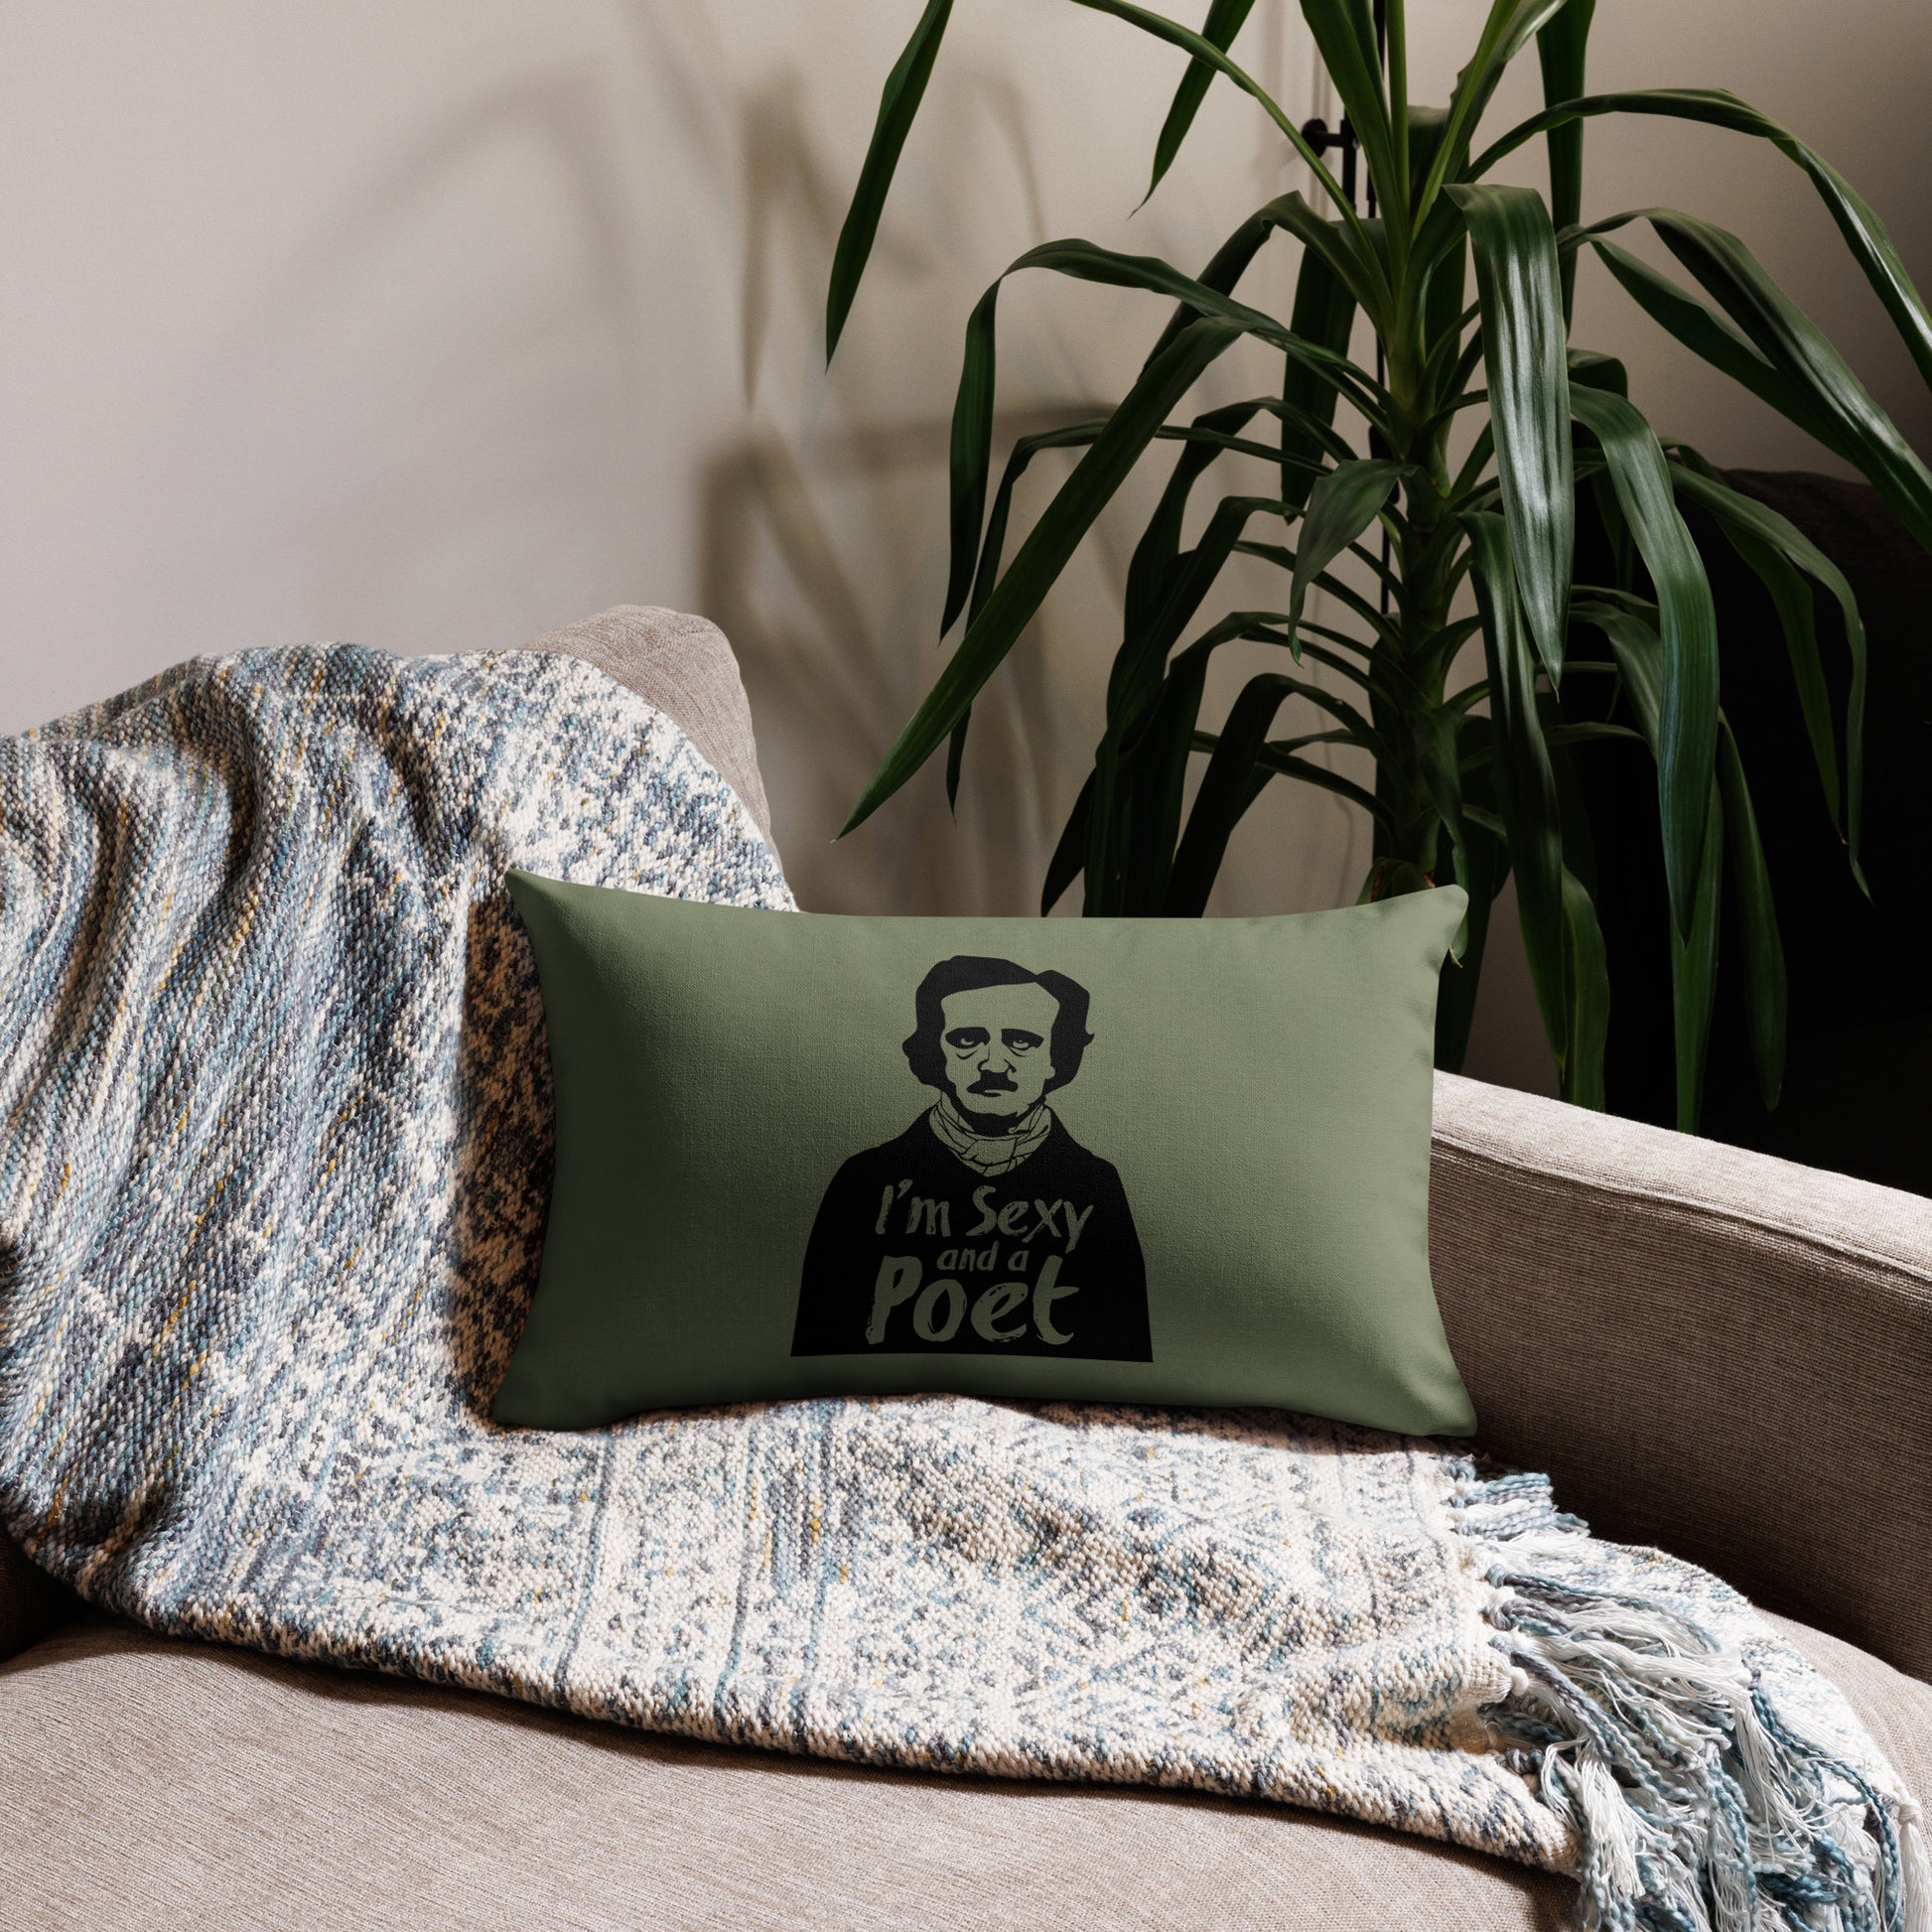 Products Edgar Allan Poe "I'm Sexy and a Poet" Premium Pillow - Green 20 x 12